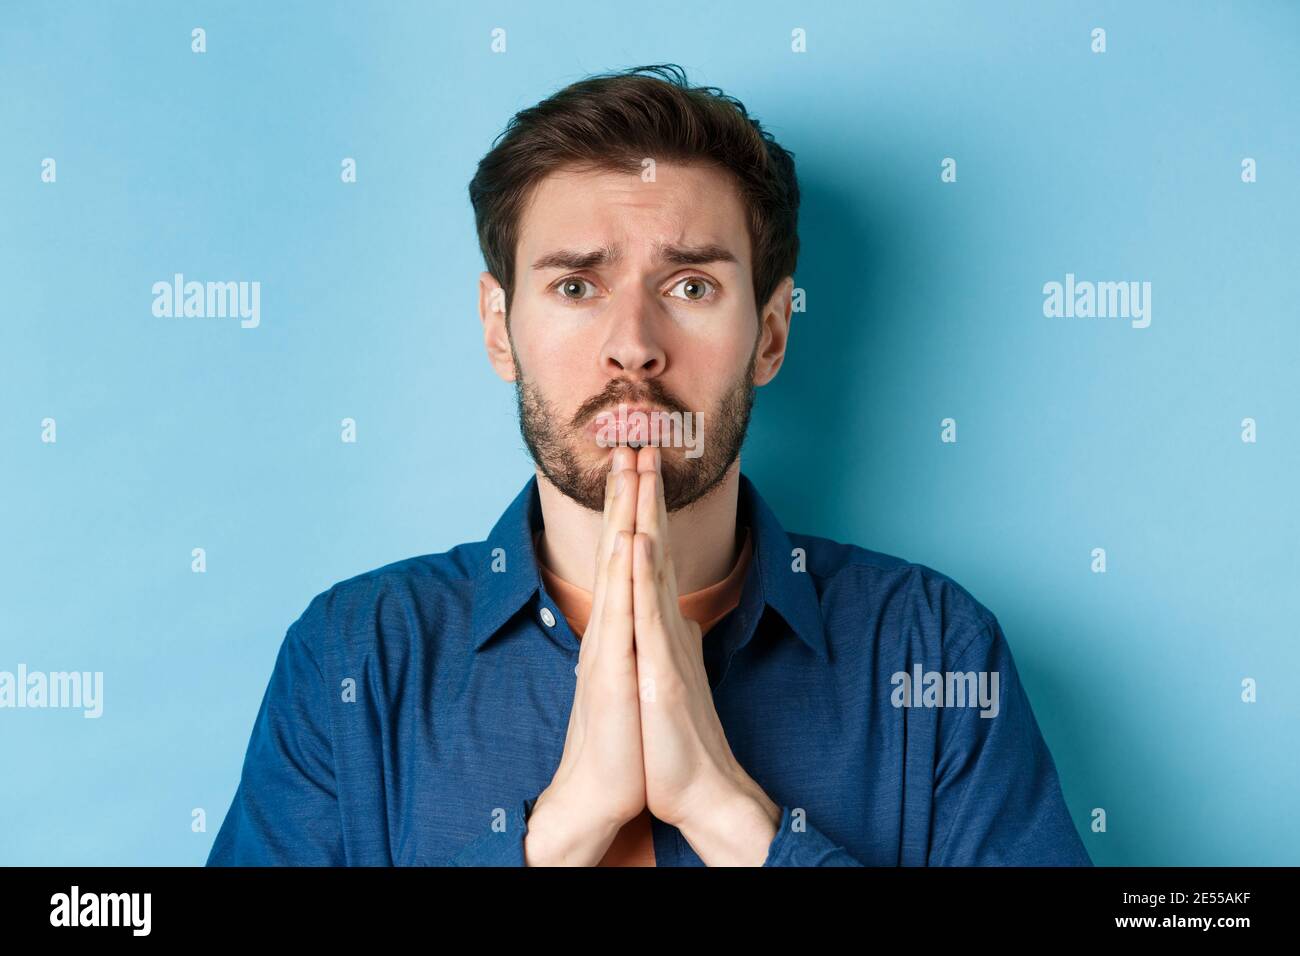 Sad young man begging for help, apoligizing and sobbing miserable, standing on blue background Stock Photo